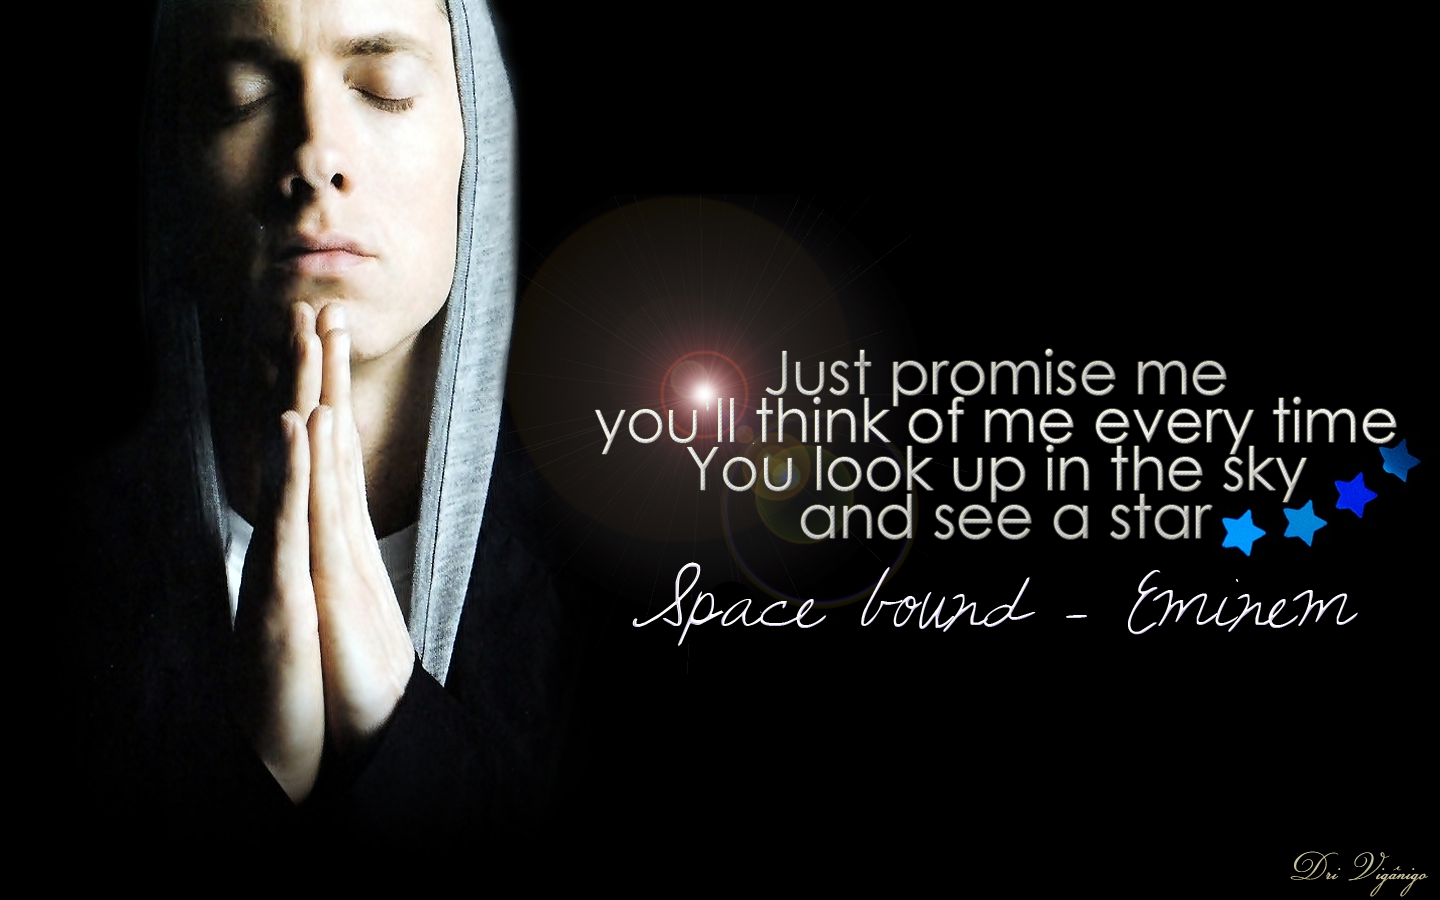 Bubbled Quotes: Eminem Quotes and Sayings